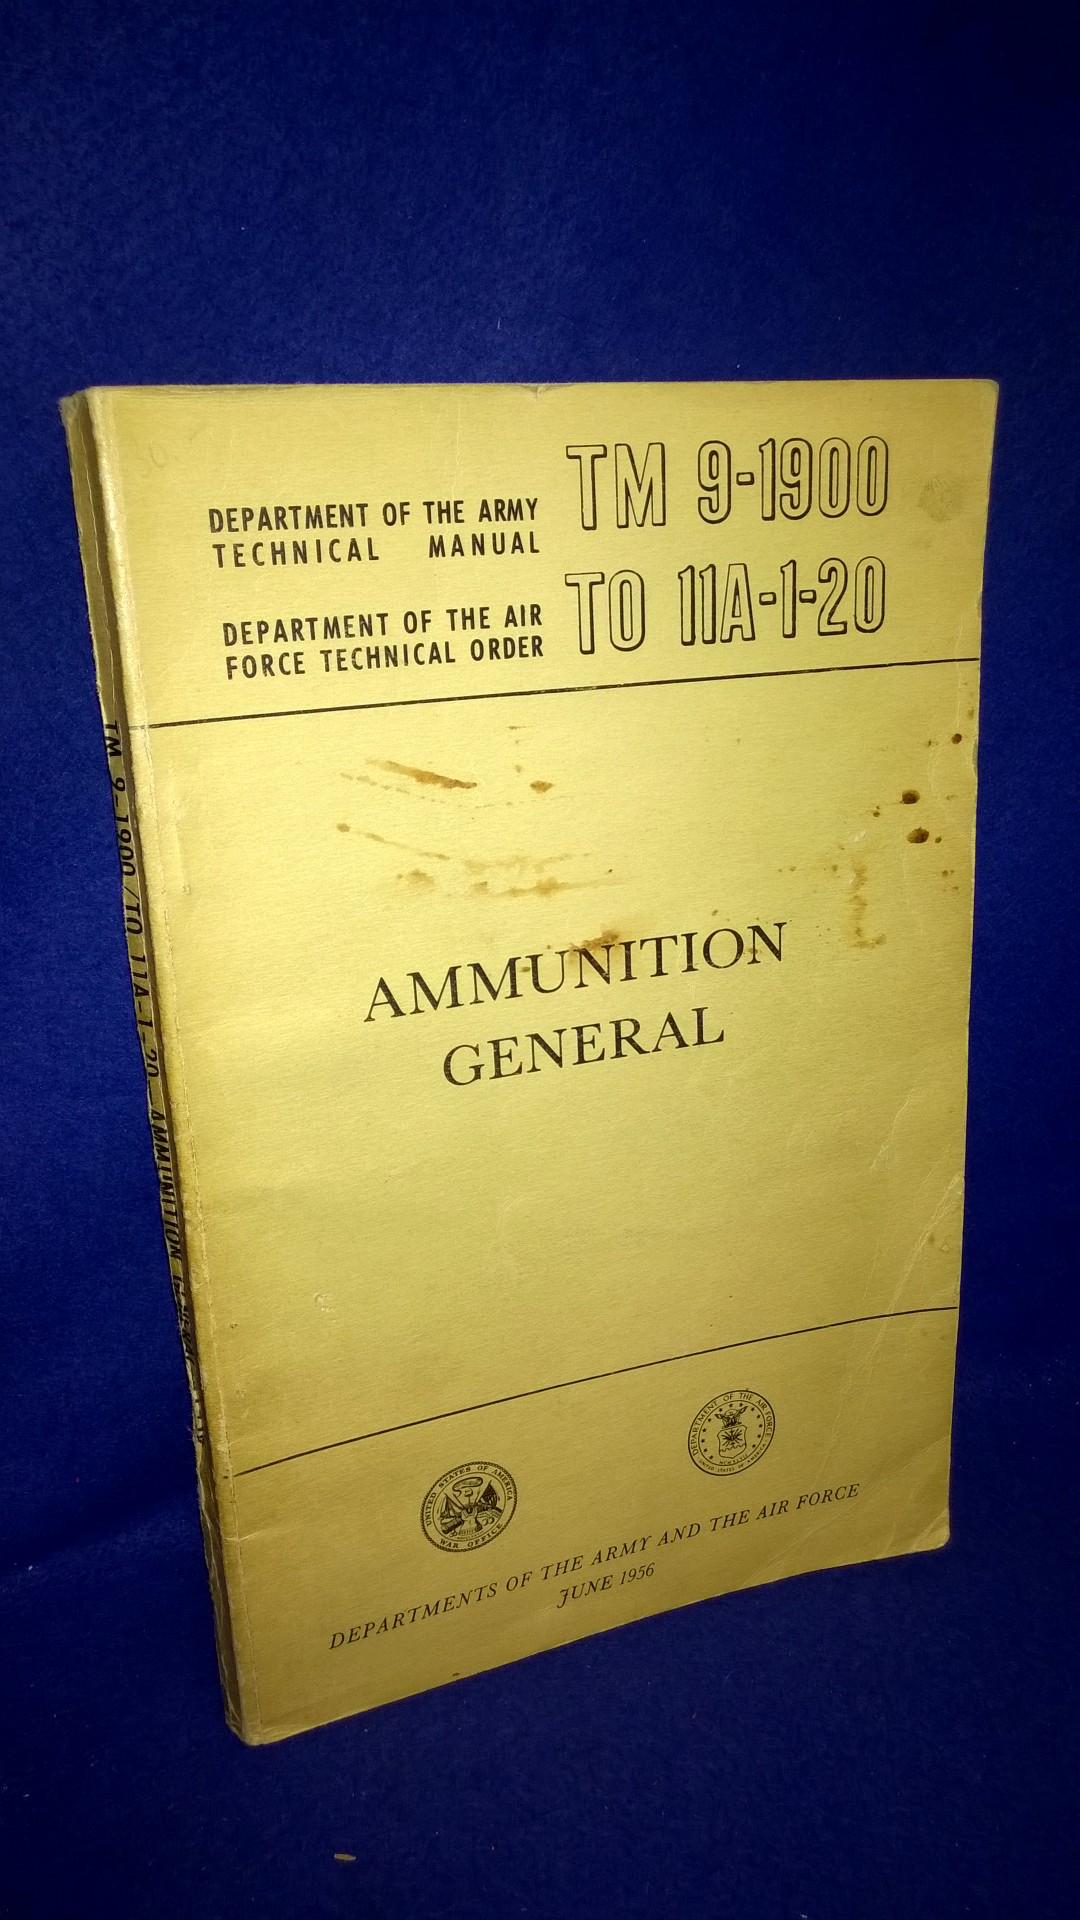 TM 9-1900. DEPARTMENT OF THE ARMY TECHNICAL MANUAL. AMMUNITION, GENERAL.